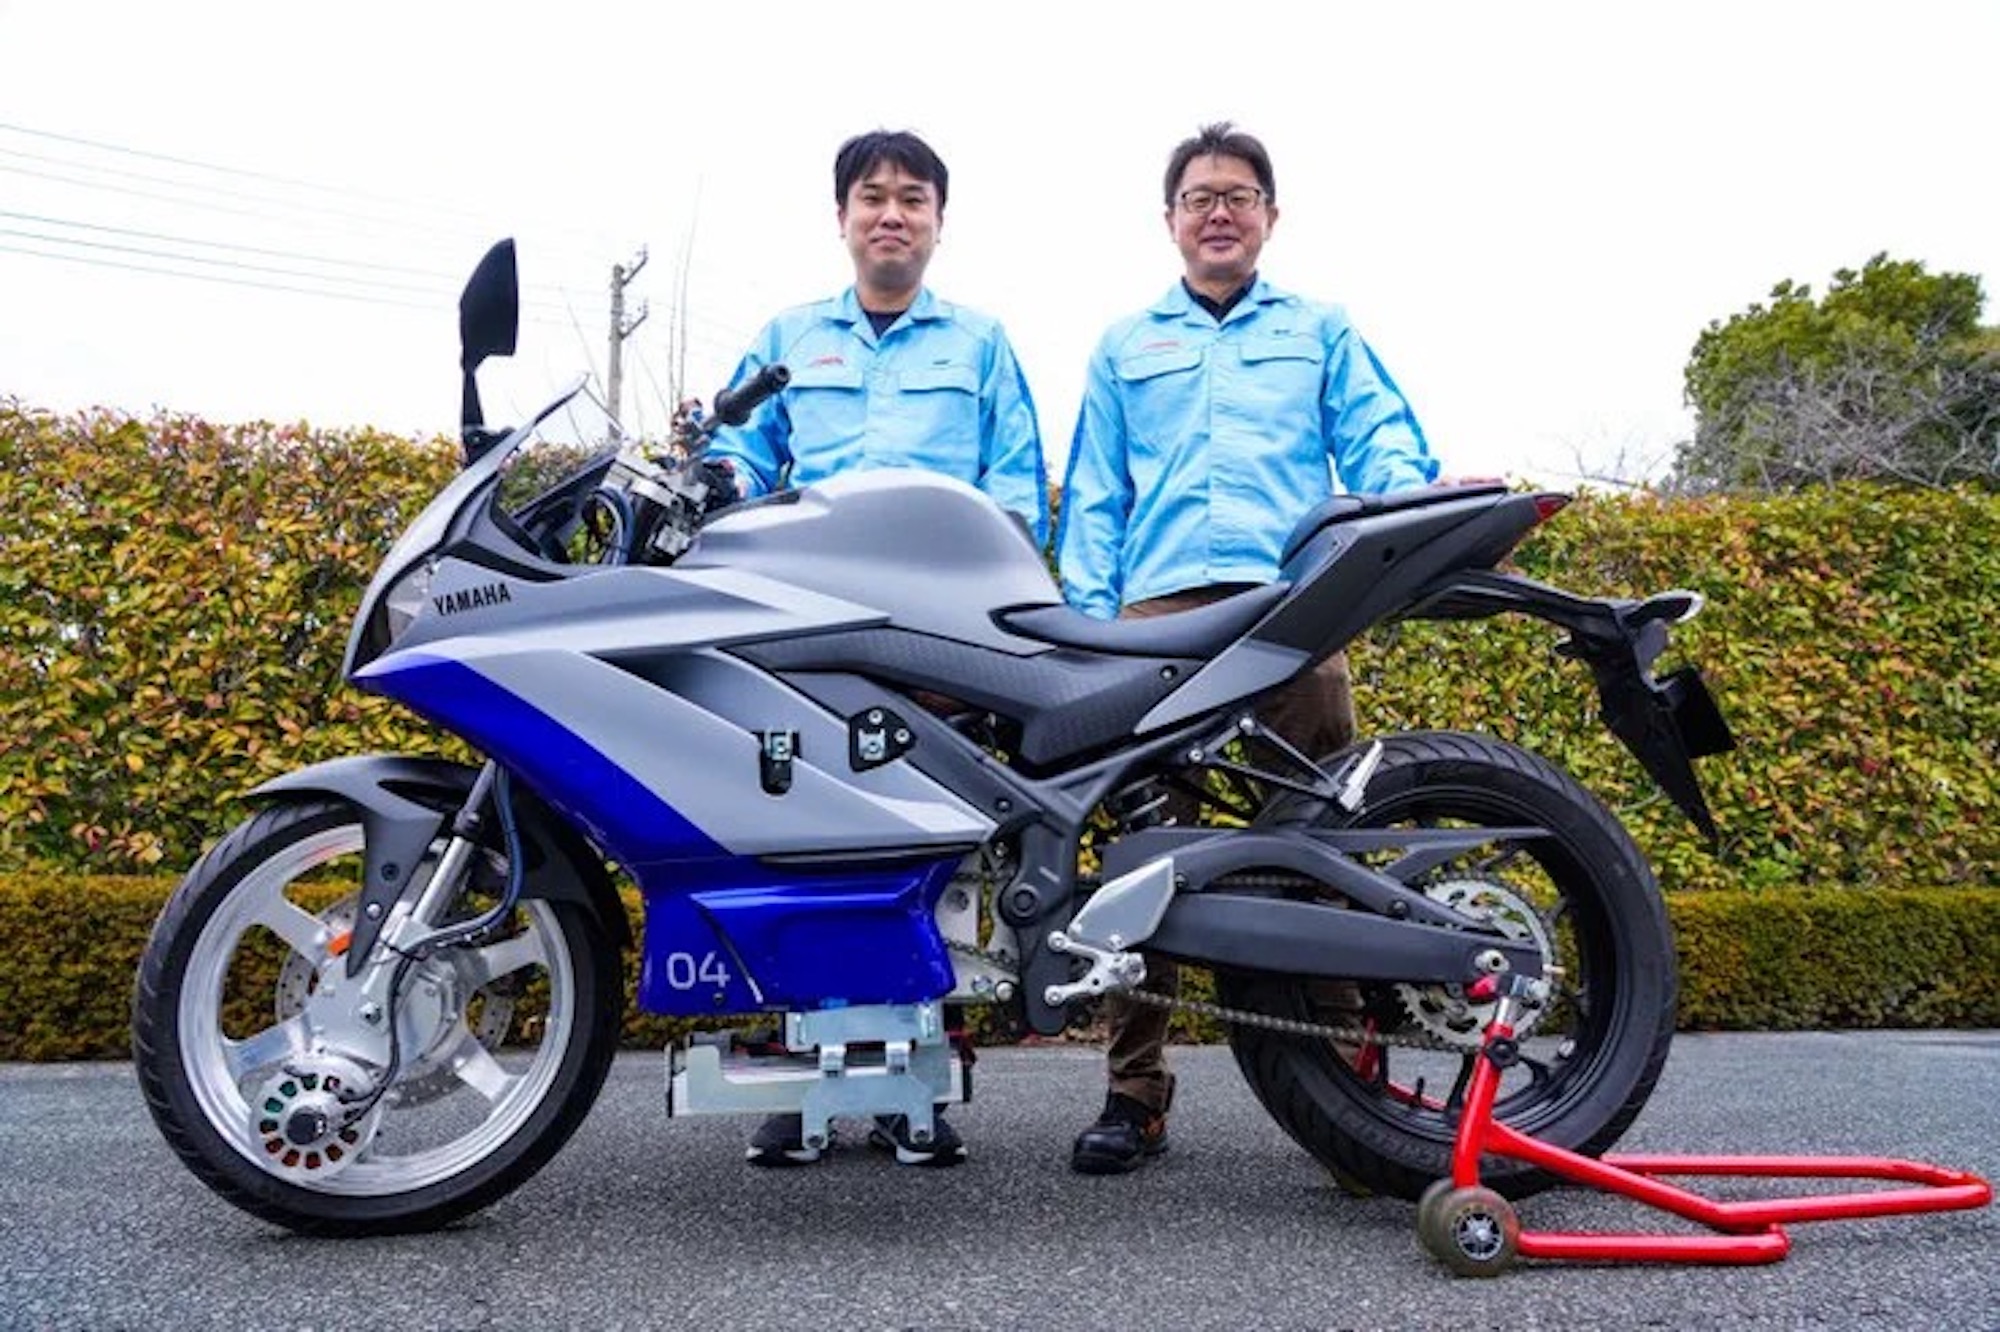 A prototype from Yamaha showing off Yamaha's Advanced Motorcycle Stabilisation Assist System (AMSAS). Media sourced from Bennetts.